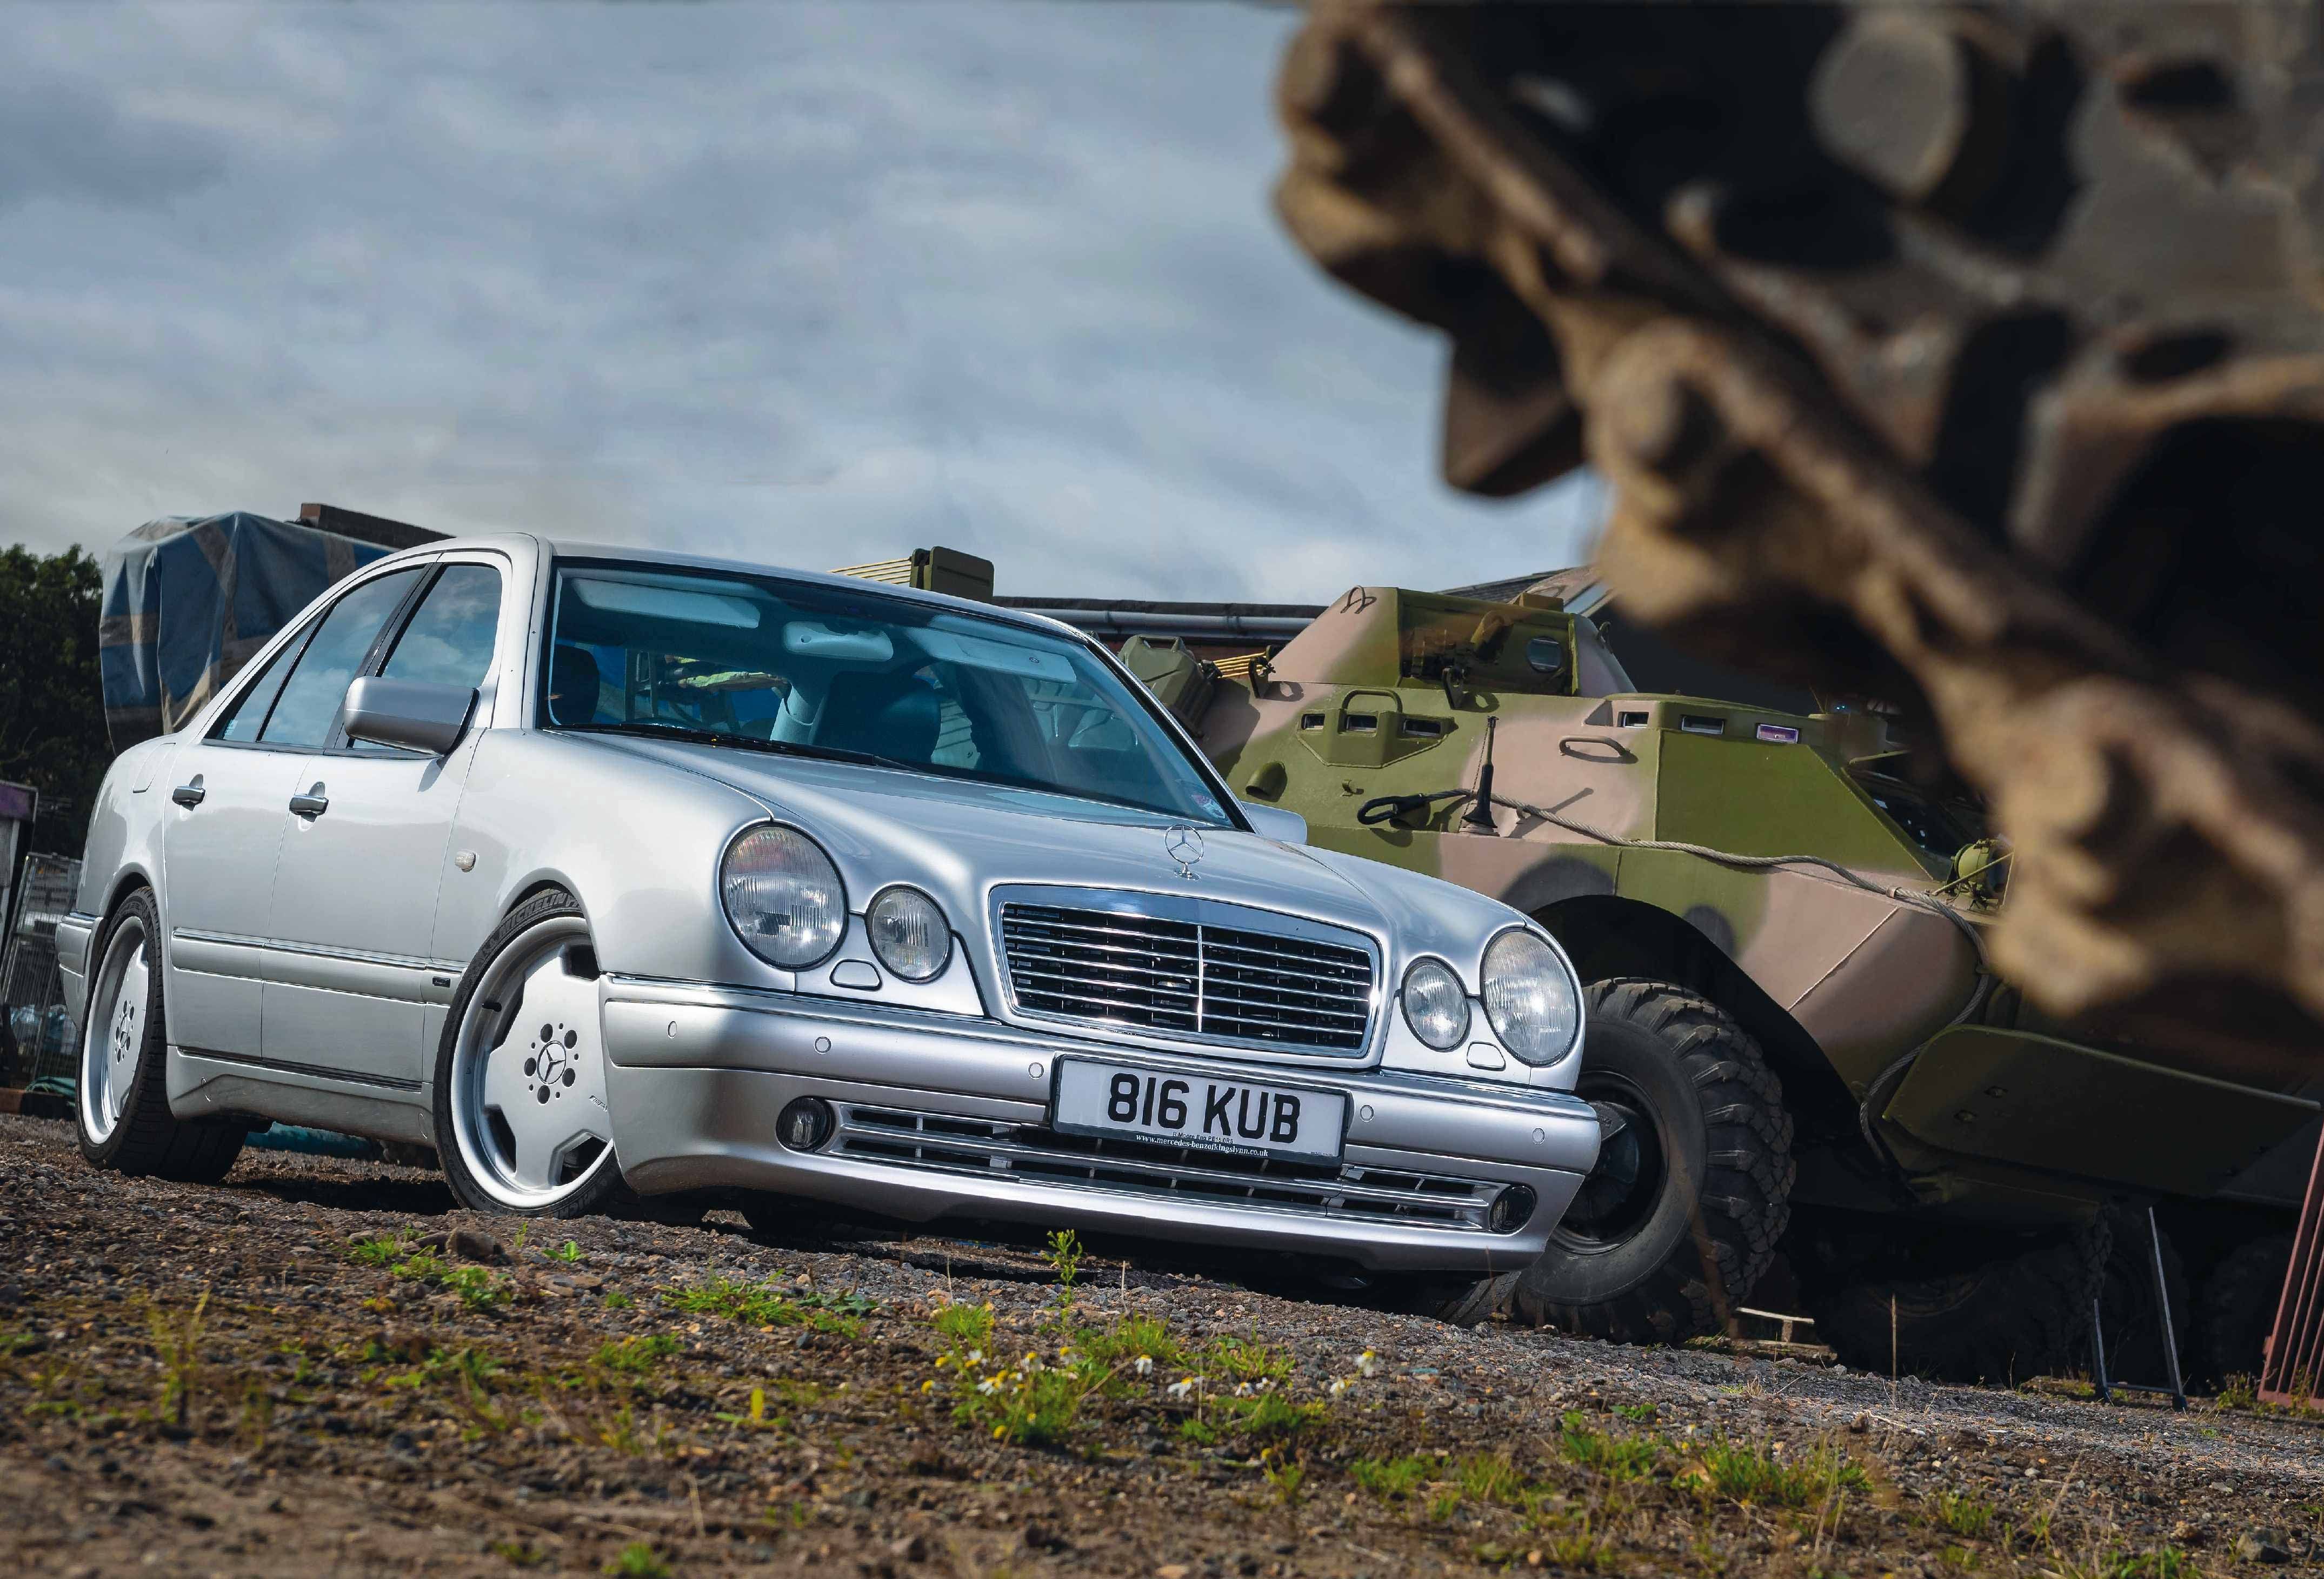 Mercedes E55 AMG parked next to a tank